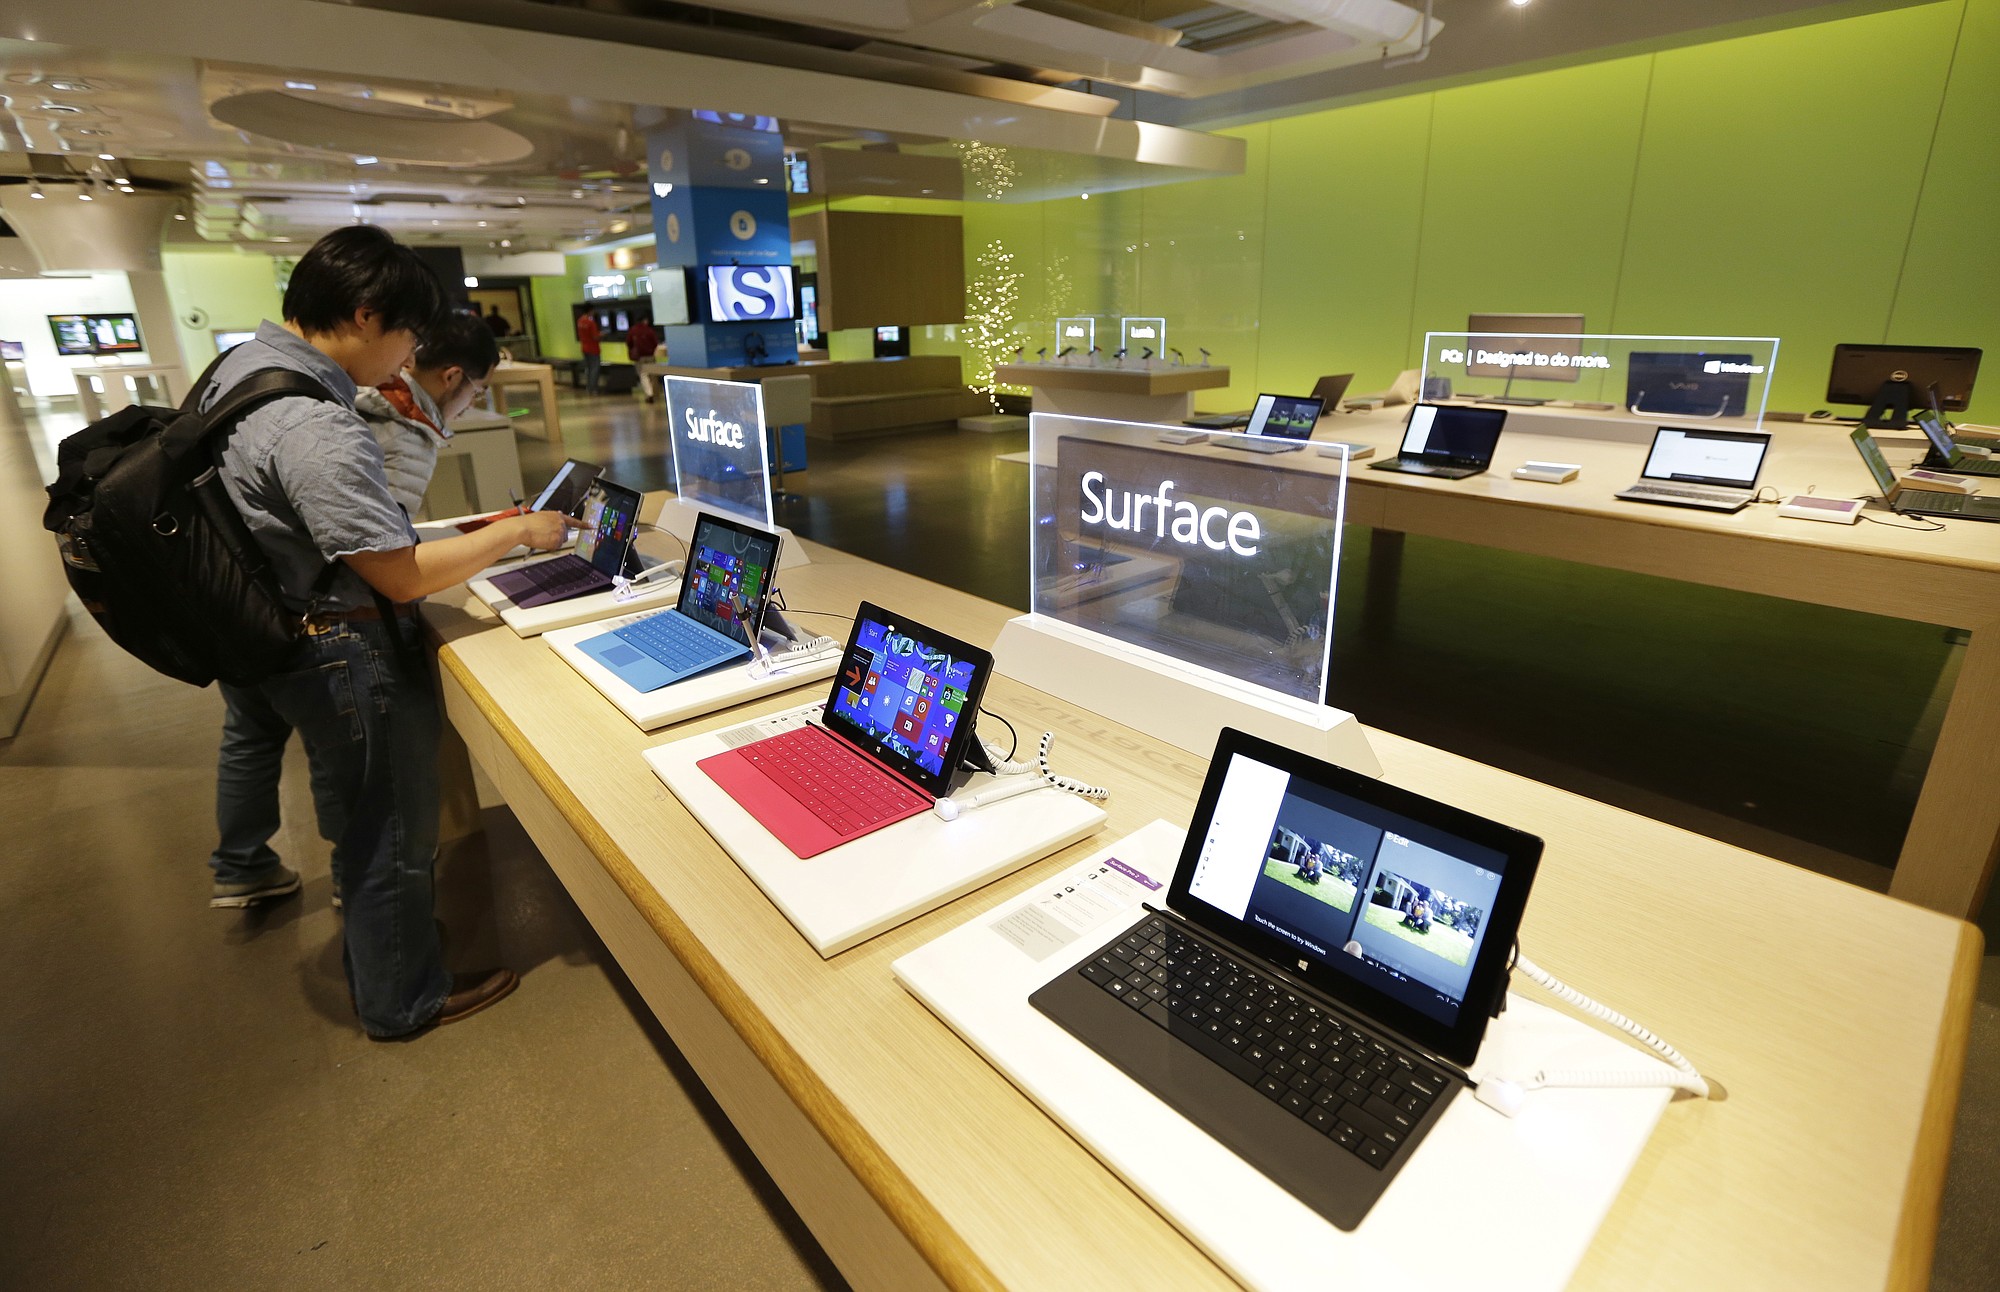 Microsoft Surface tablet computers are displayed at the Microsoft Visitor Center in Redmond.